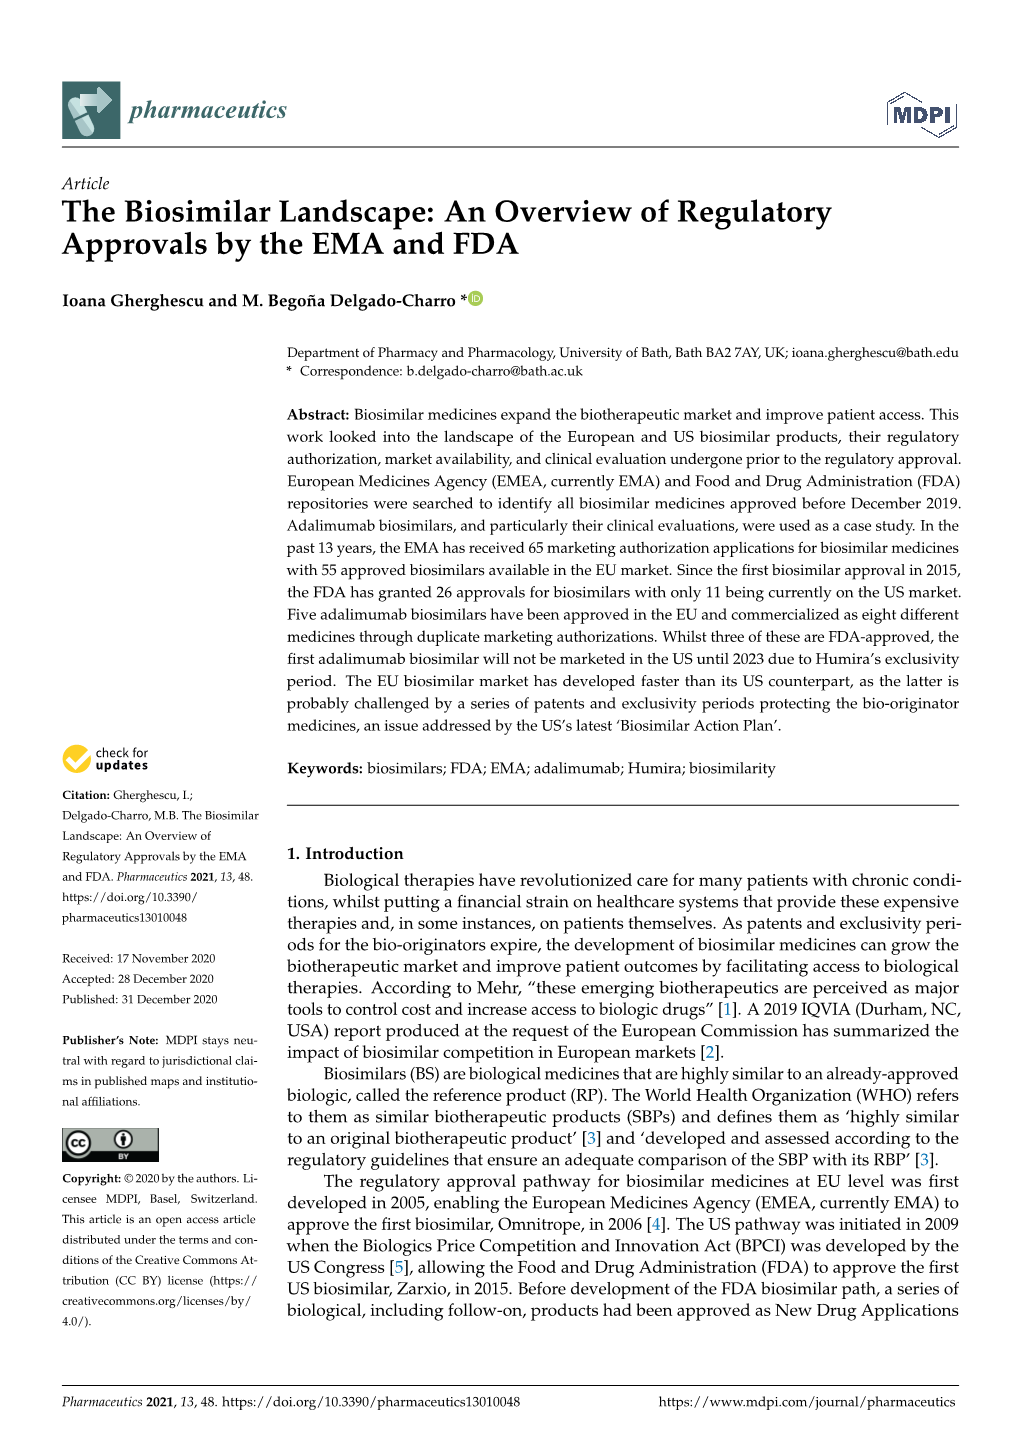 The Biosimilar Landscape: an Overview of Regulatory Approvals by the EMA and FDA